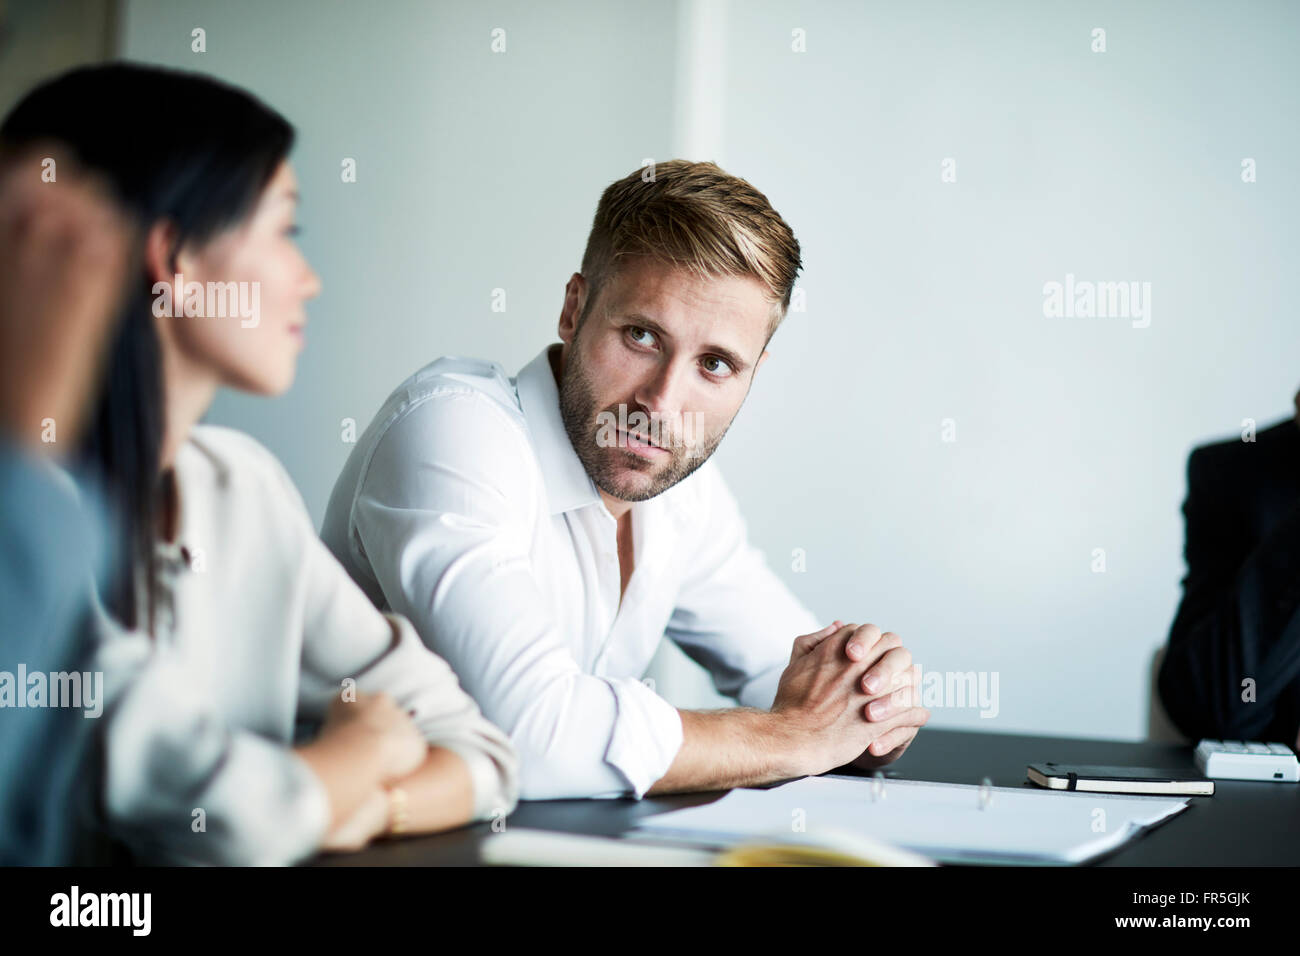 Businessman talking in meeting Banque D'Images